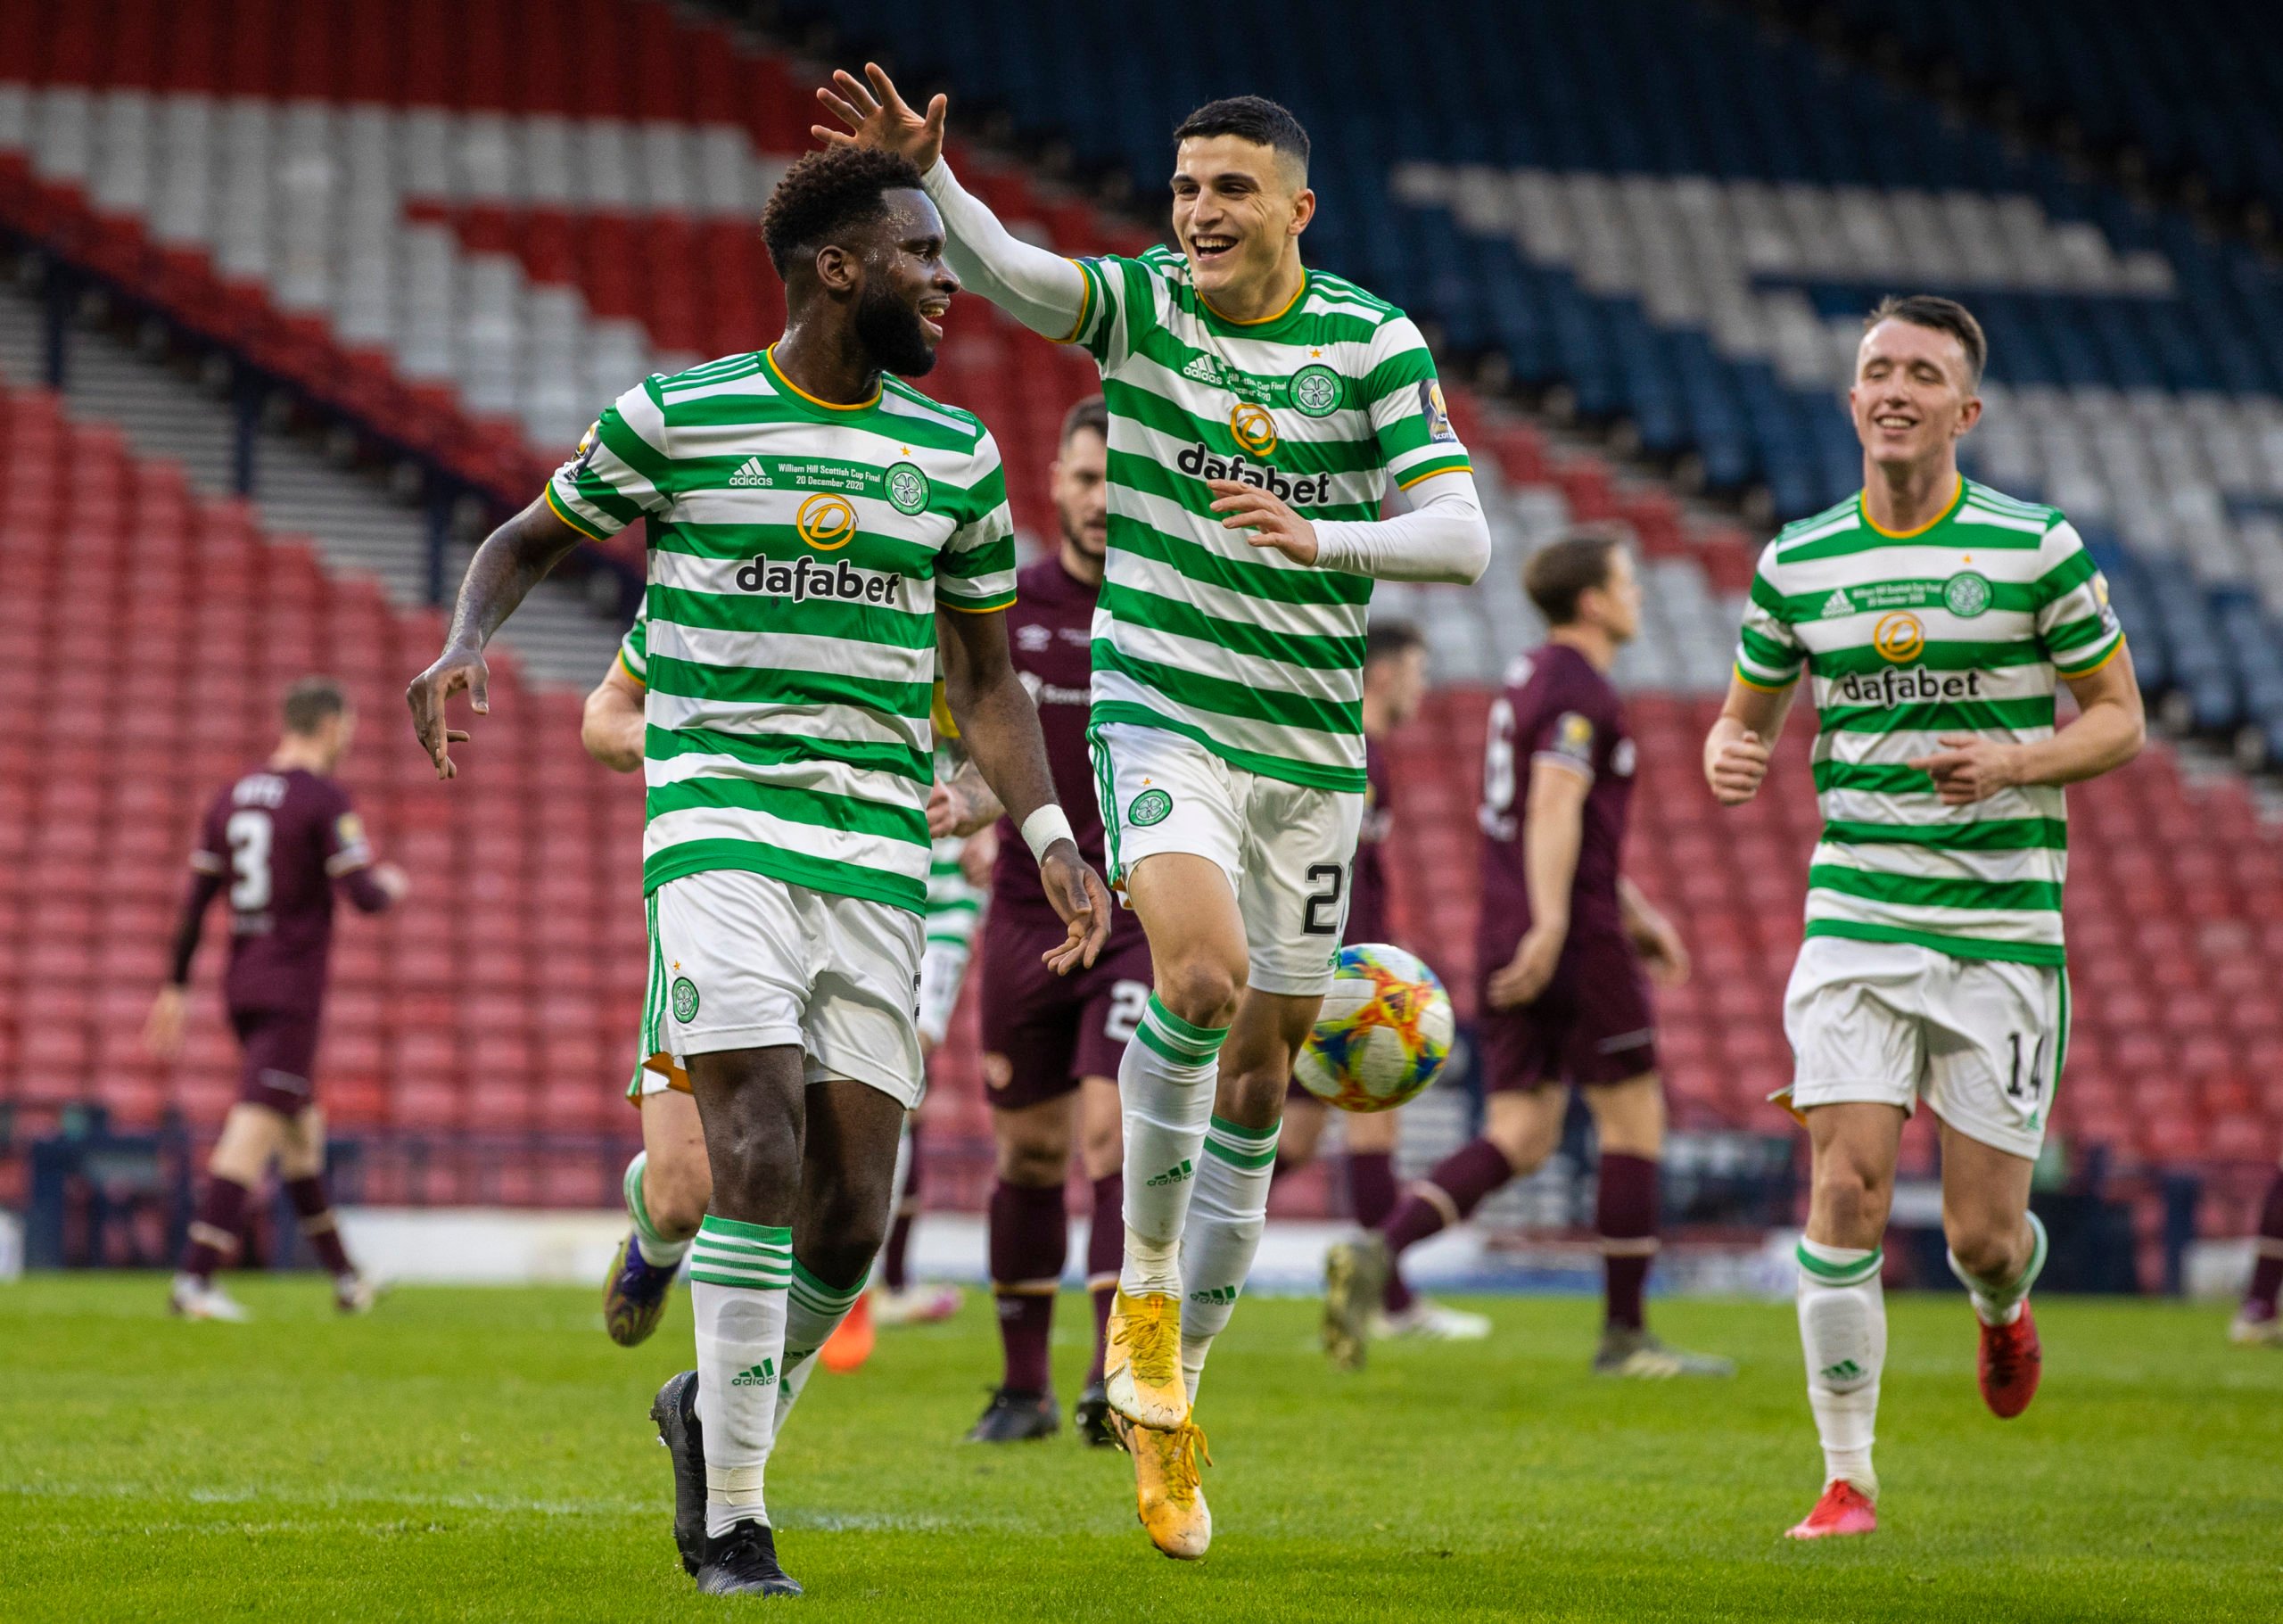 Celtic will lose Odsonne Edouard in the summer, but the time to replace him is now